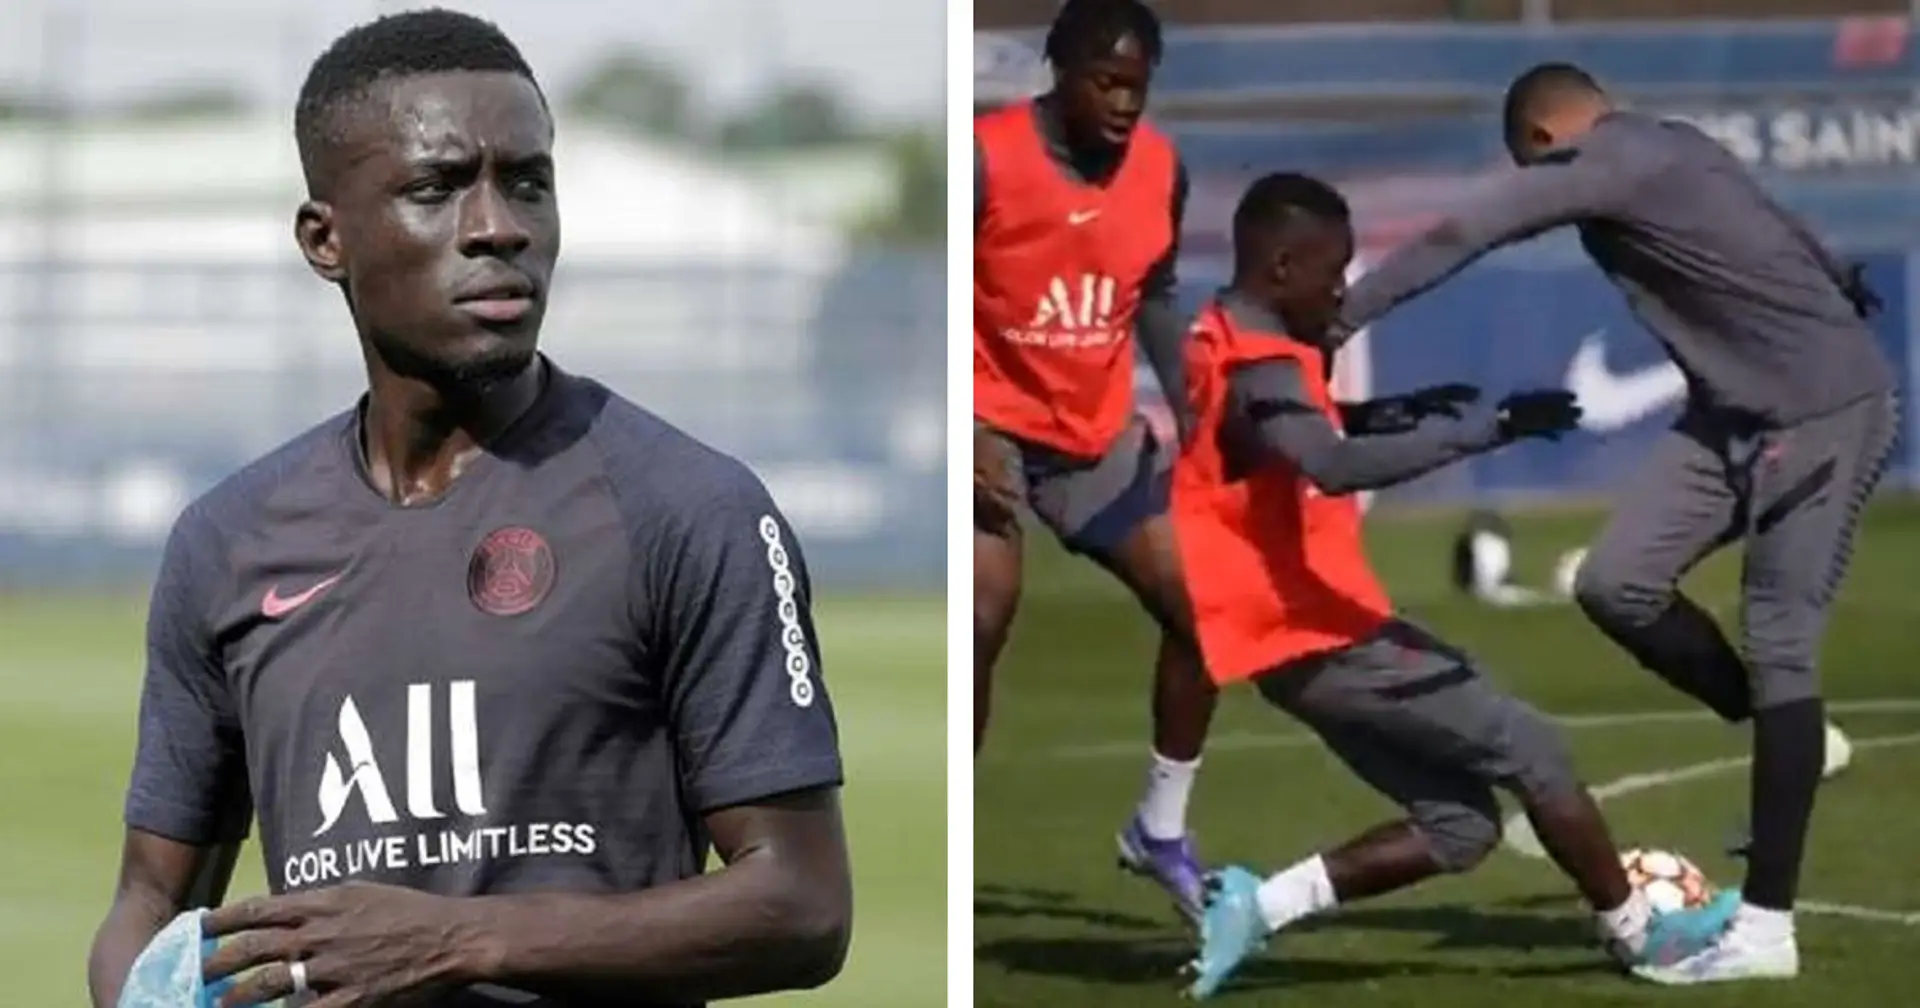 Idrissa Gueye forced to turn off social media comments after being blamed for Mbappe's injury